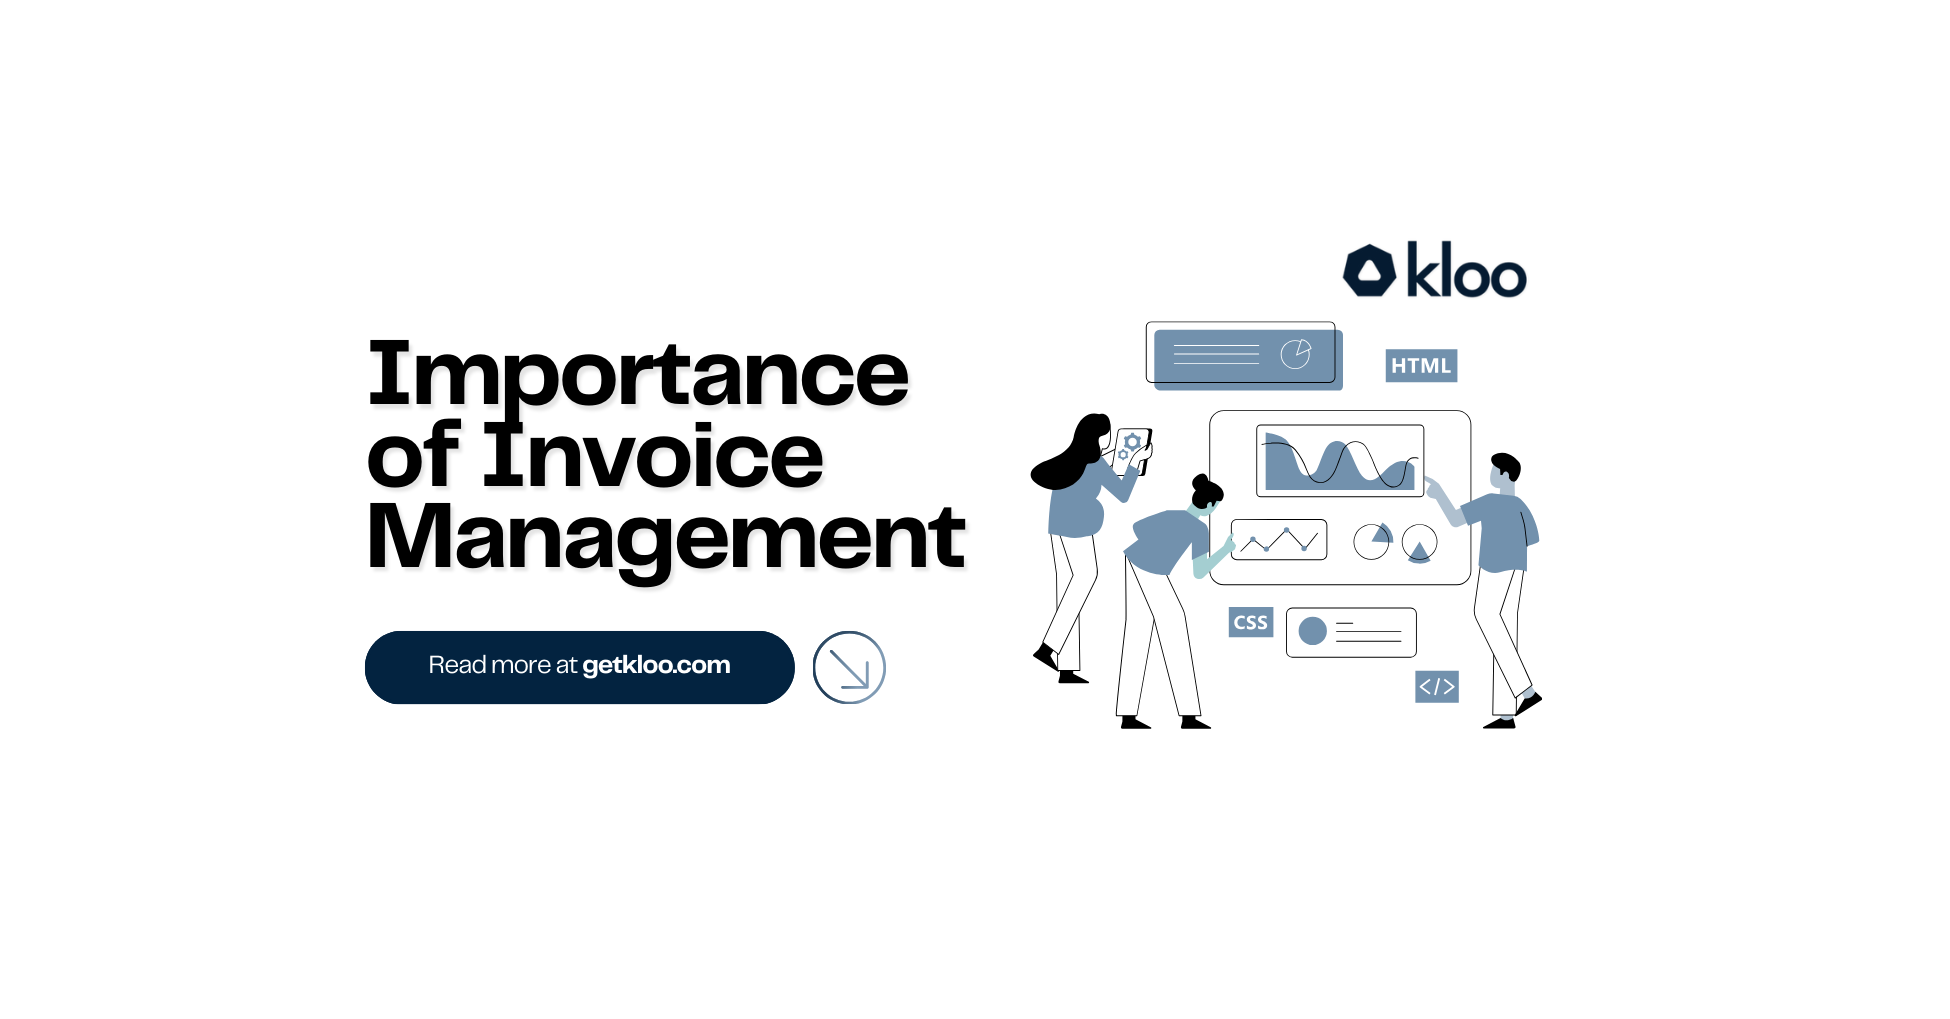 Invoice Management with Kloo